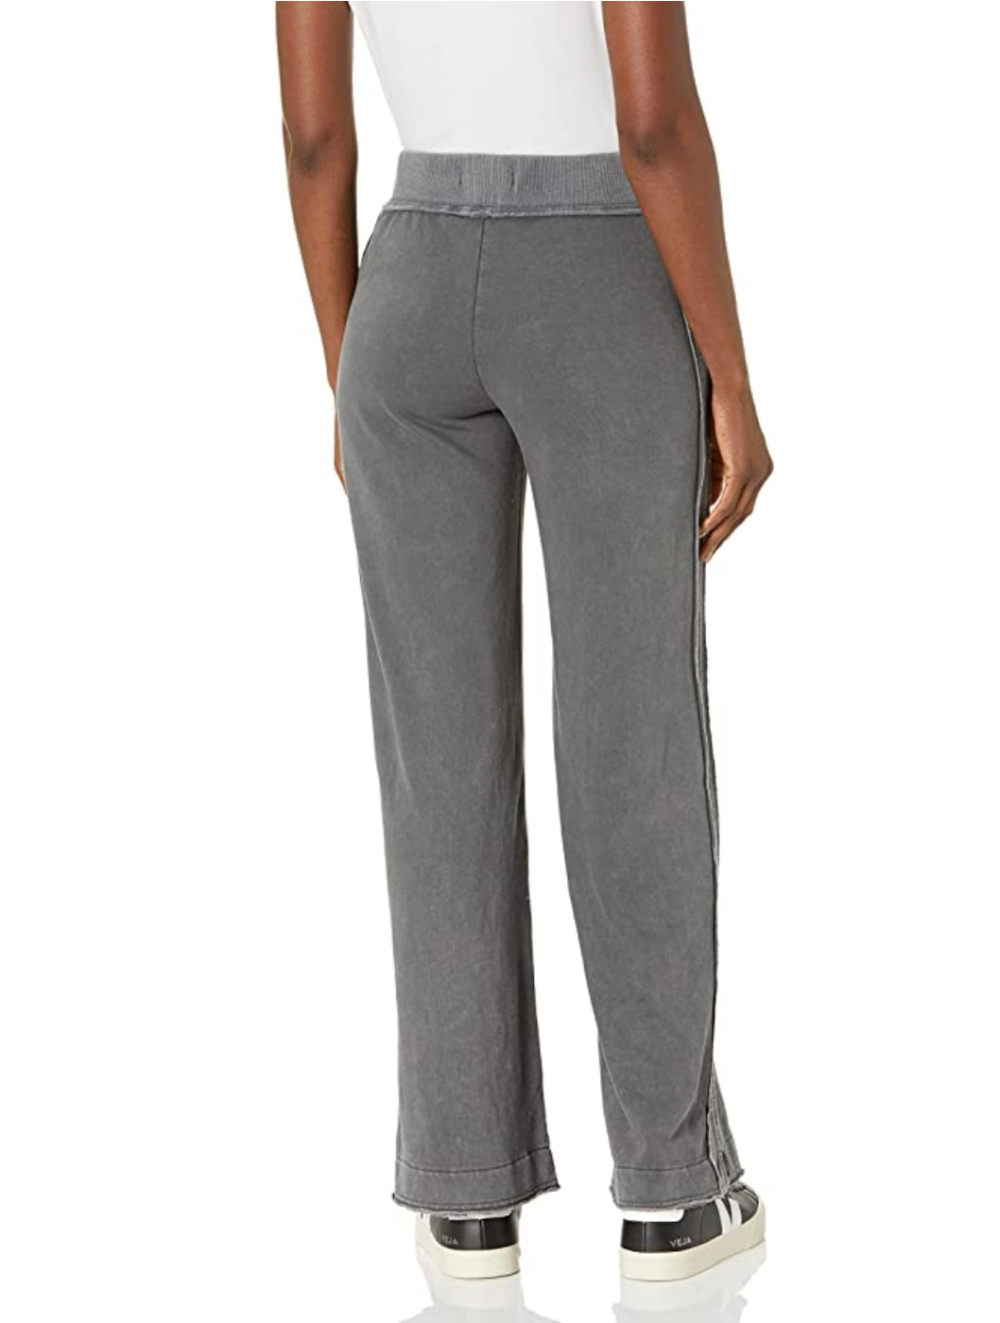 Unionbay Sweatpants Can Be Styled for Fancier Occasions